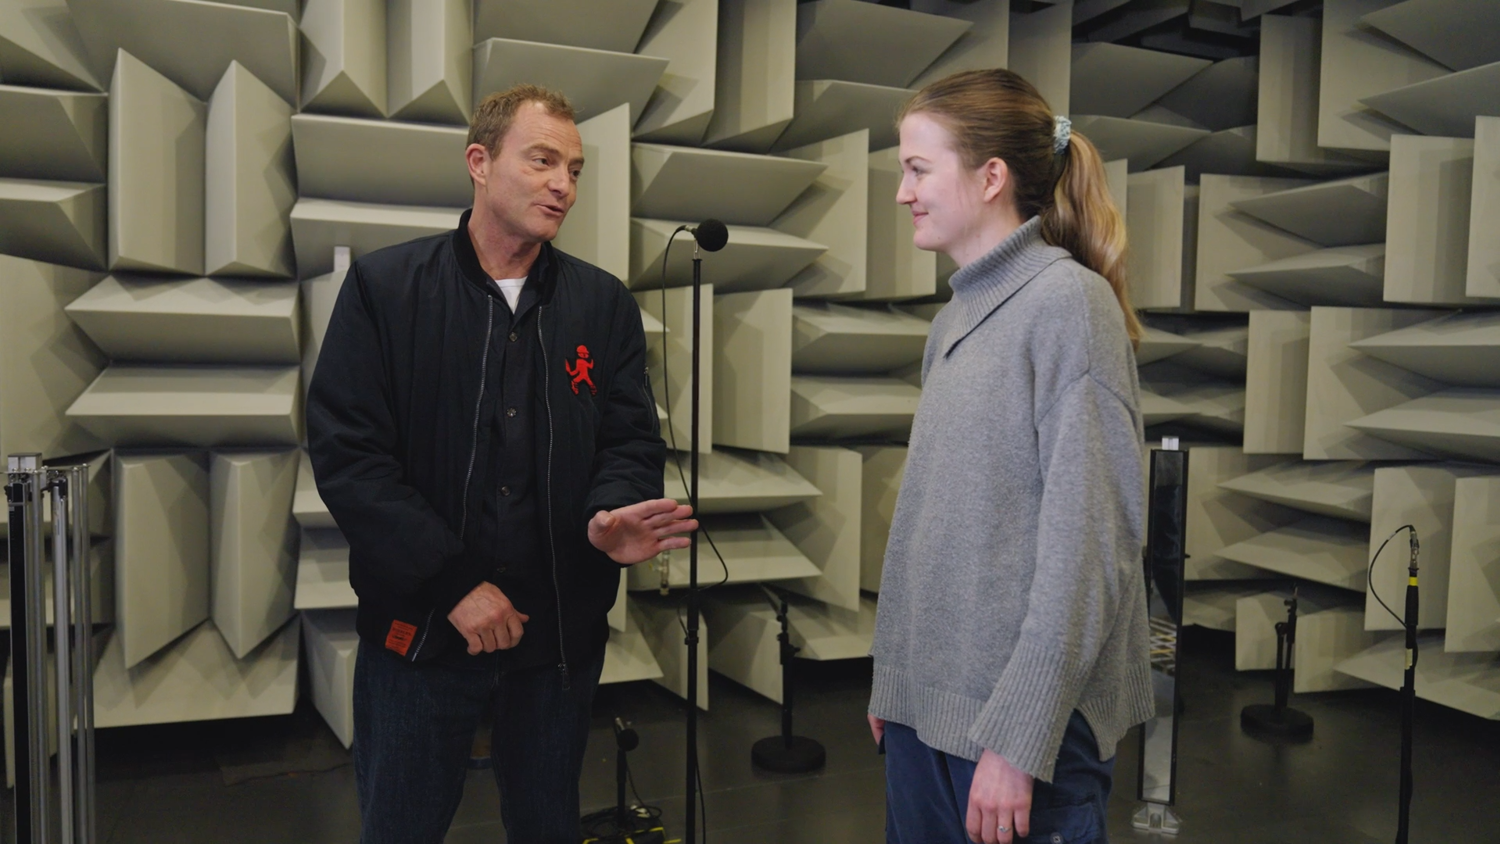 Jake Dyson meets Niamh and Sophie, Dyson Institute Alumni